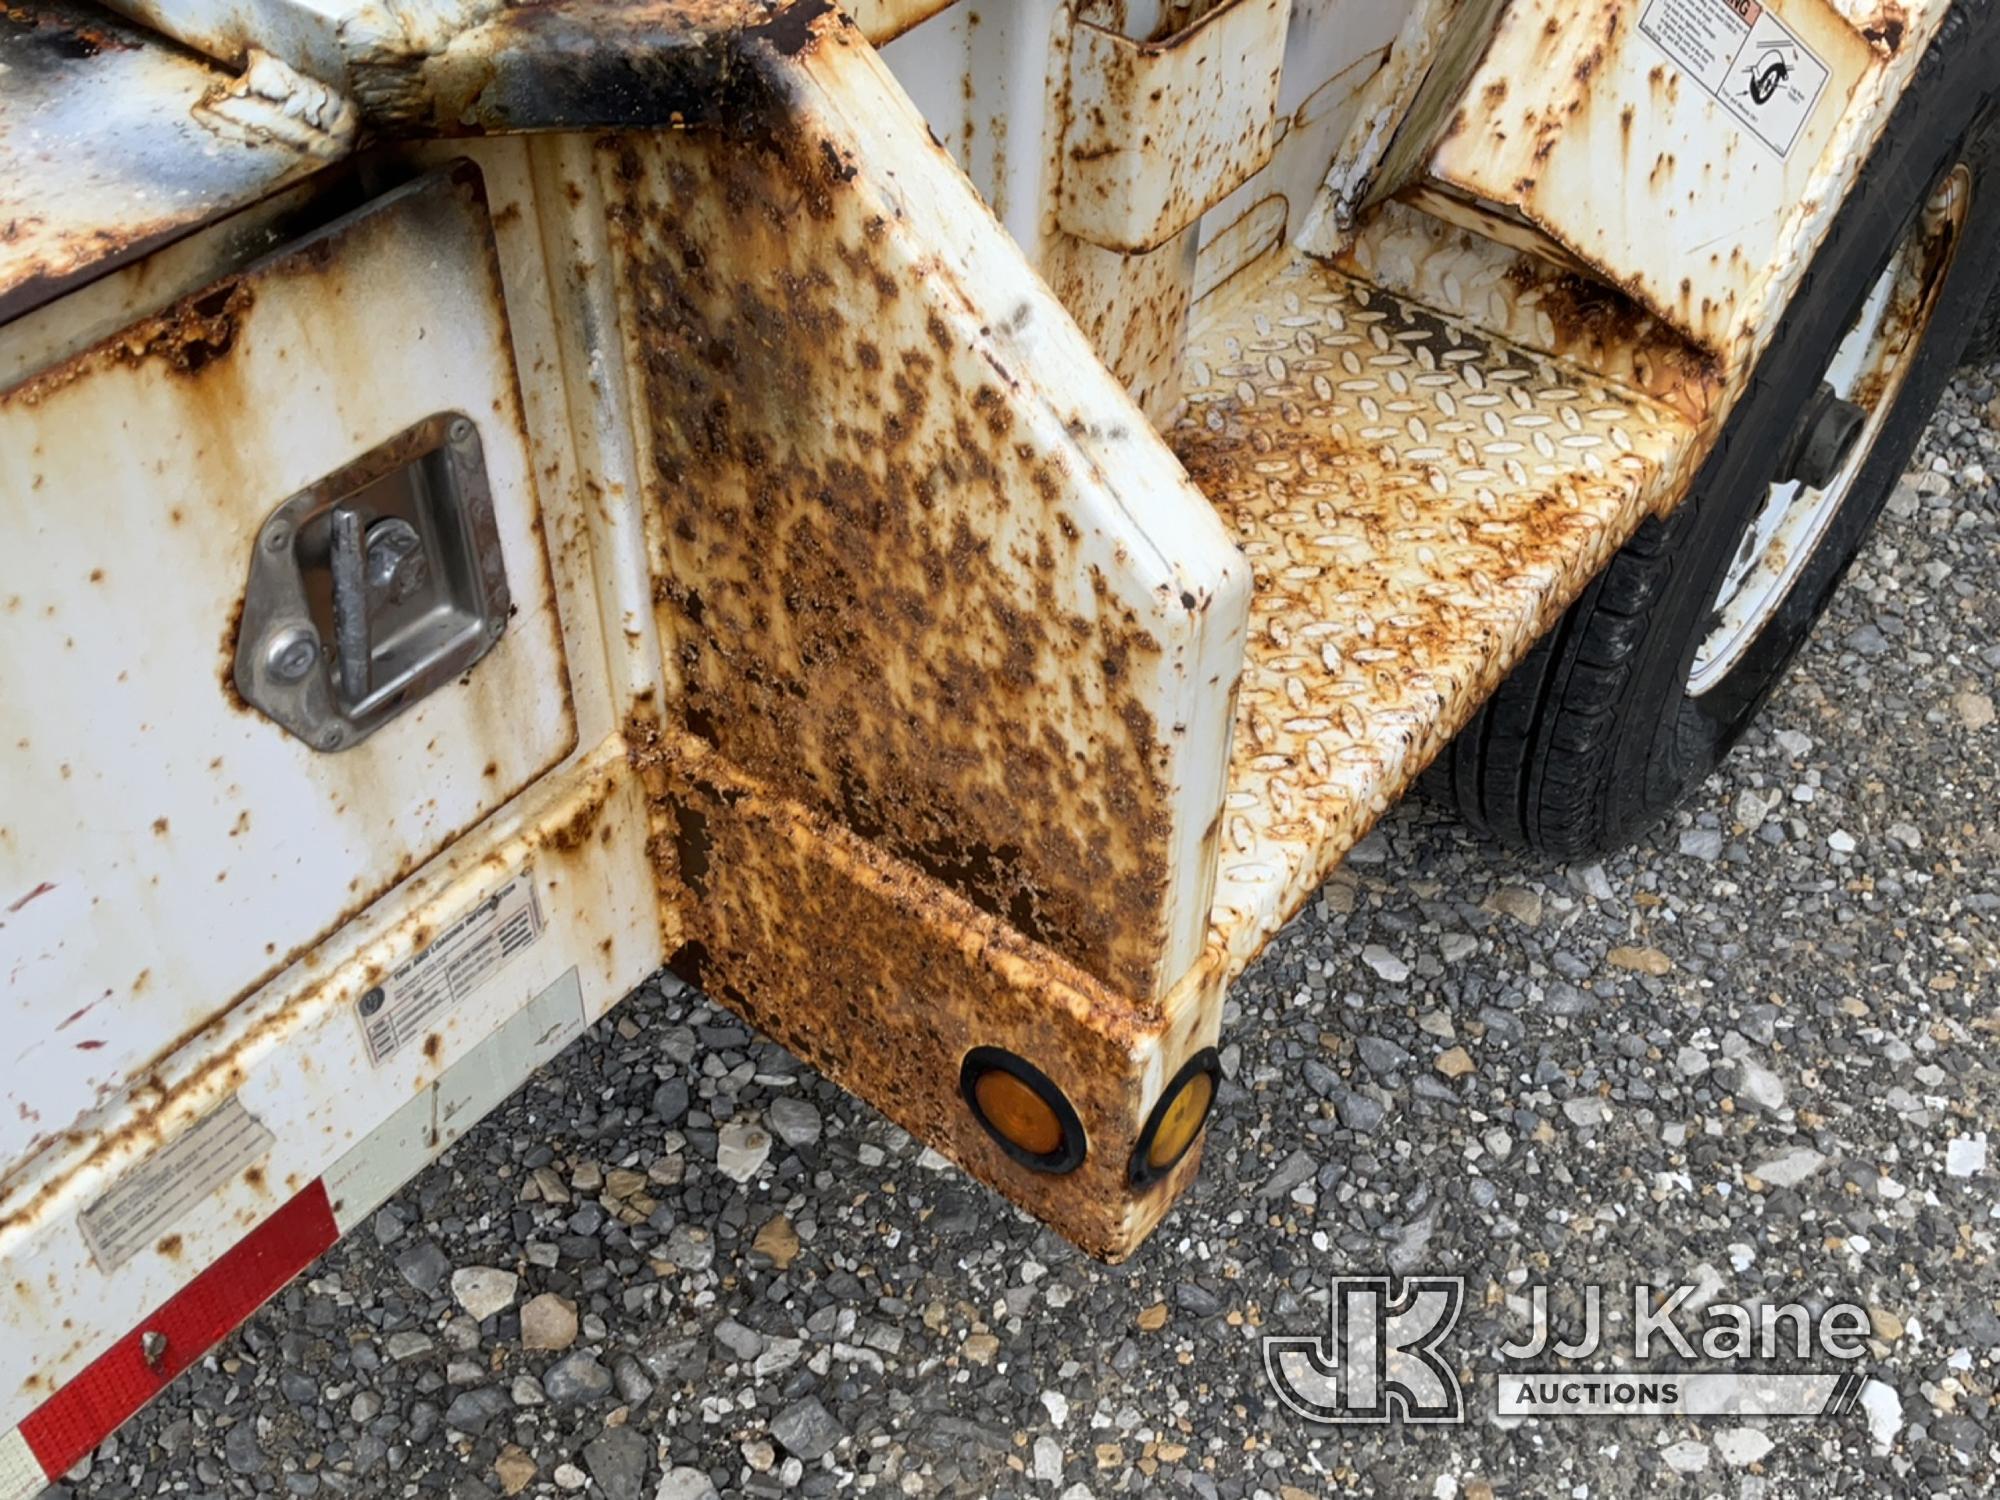 (Hawk Point, MO) 2013 Brooks Brothers T/A Pole/Material Trailer Rust Damage